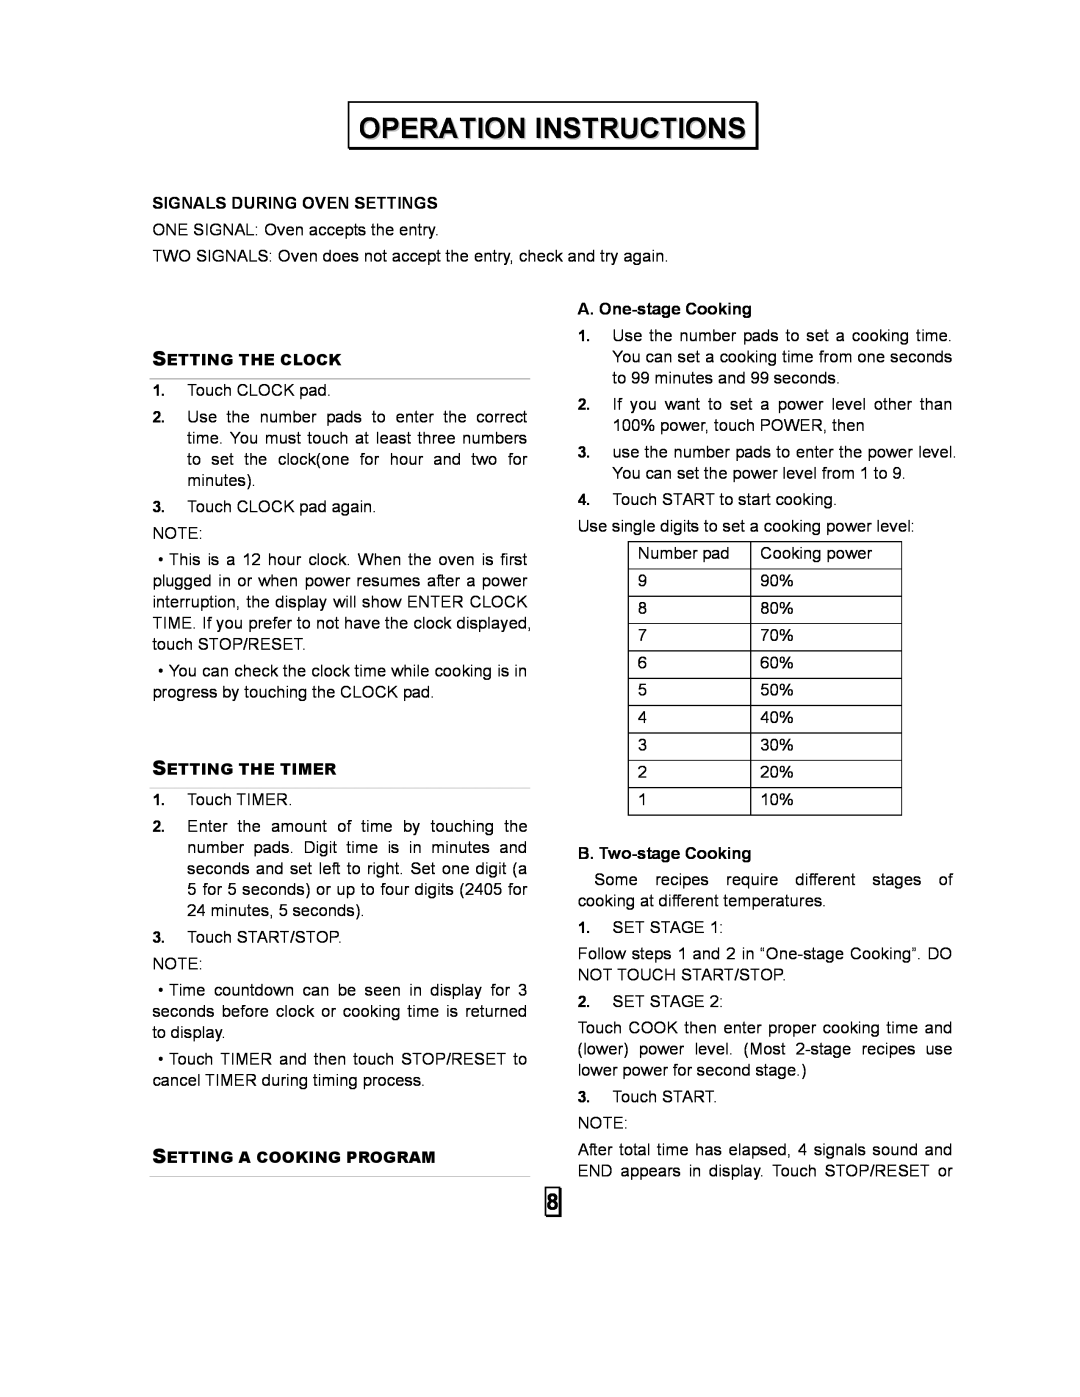 Sears 86030 user manual Operation Instructions, Signals During Oven Settings, A. One-stageCooking, B. Two-stageCooking 